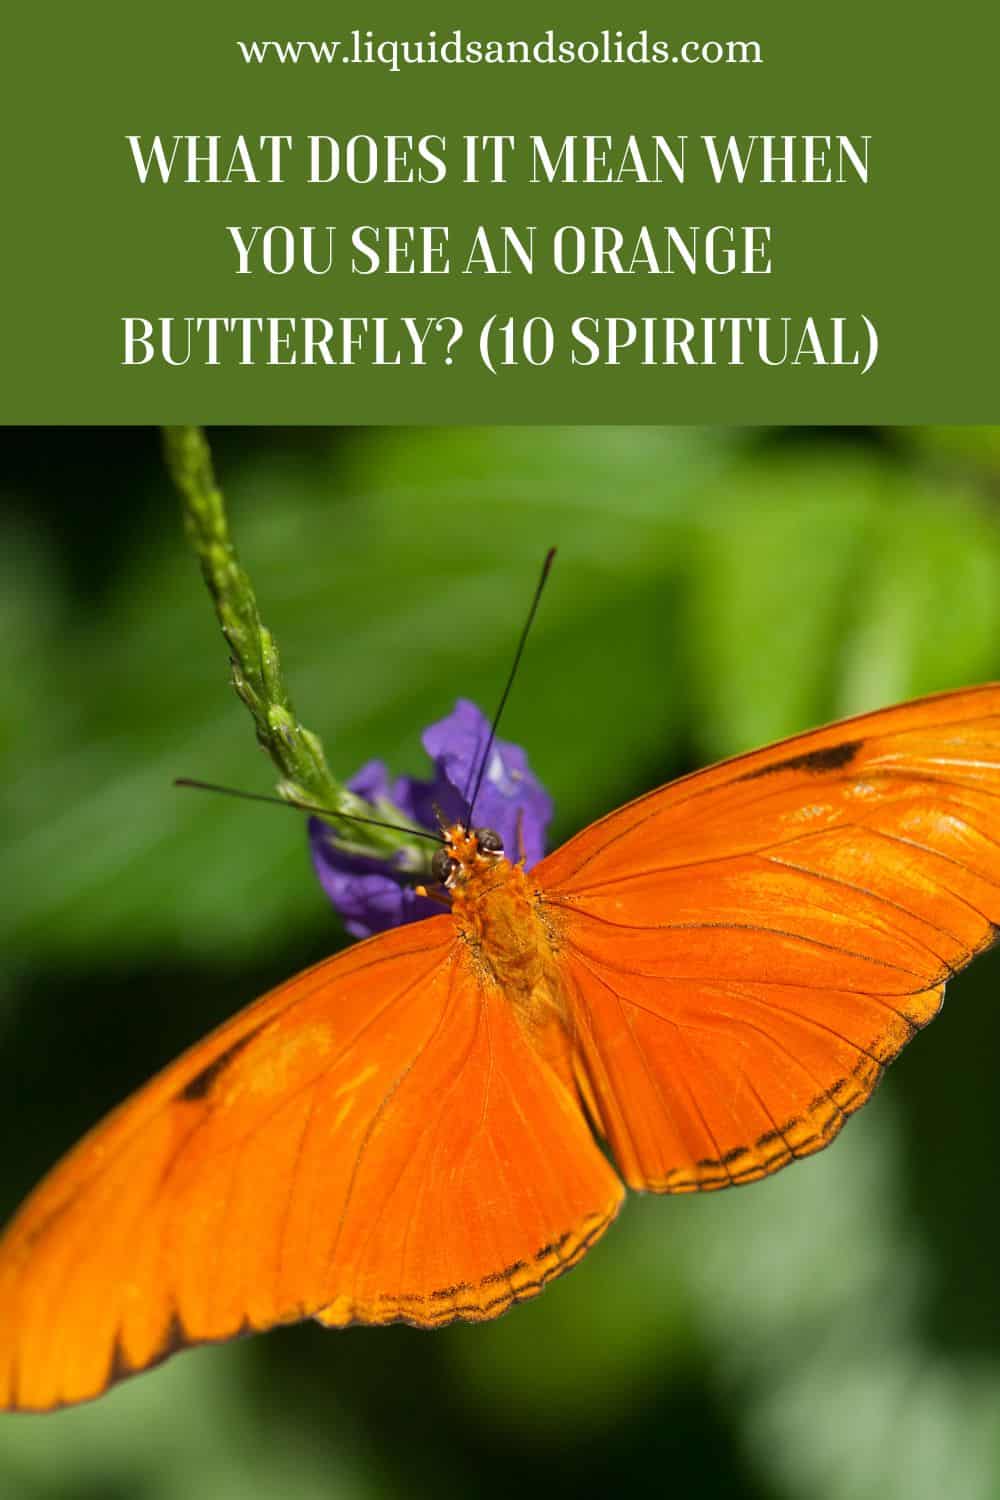 What Does It Mean When You See An Orange Butterfly (10 Spiritual)